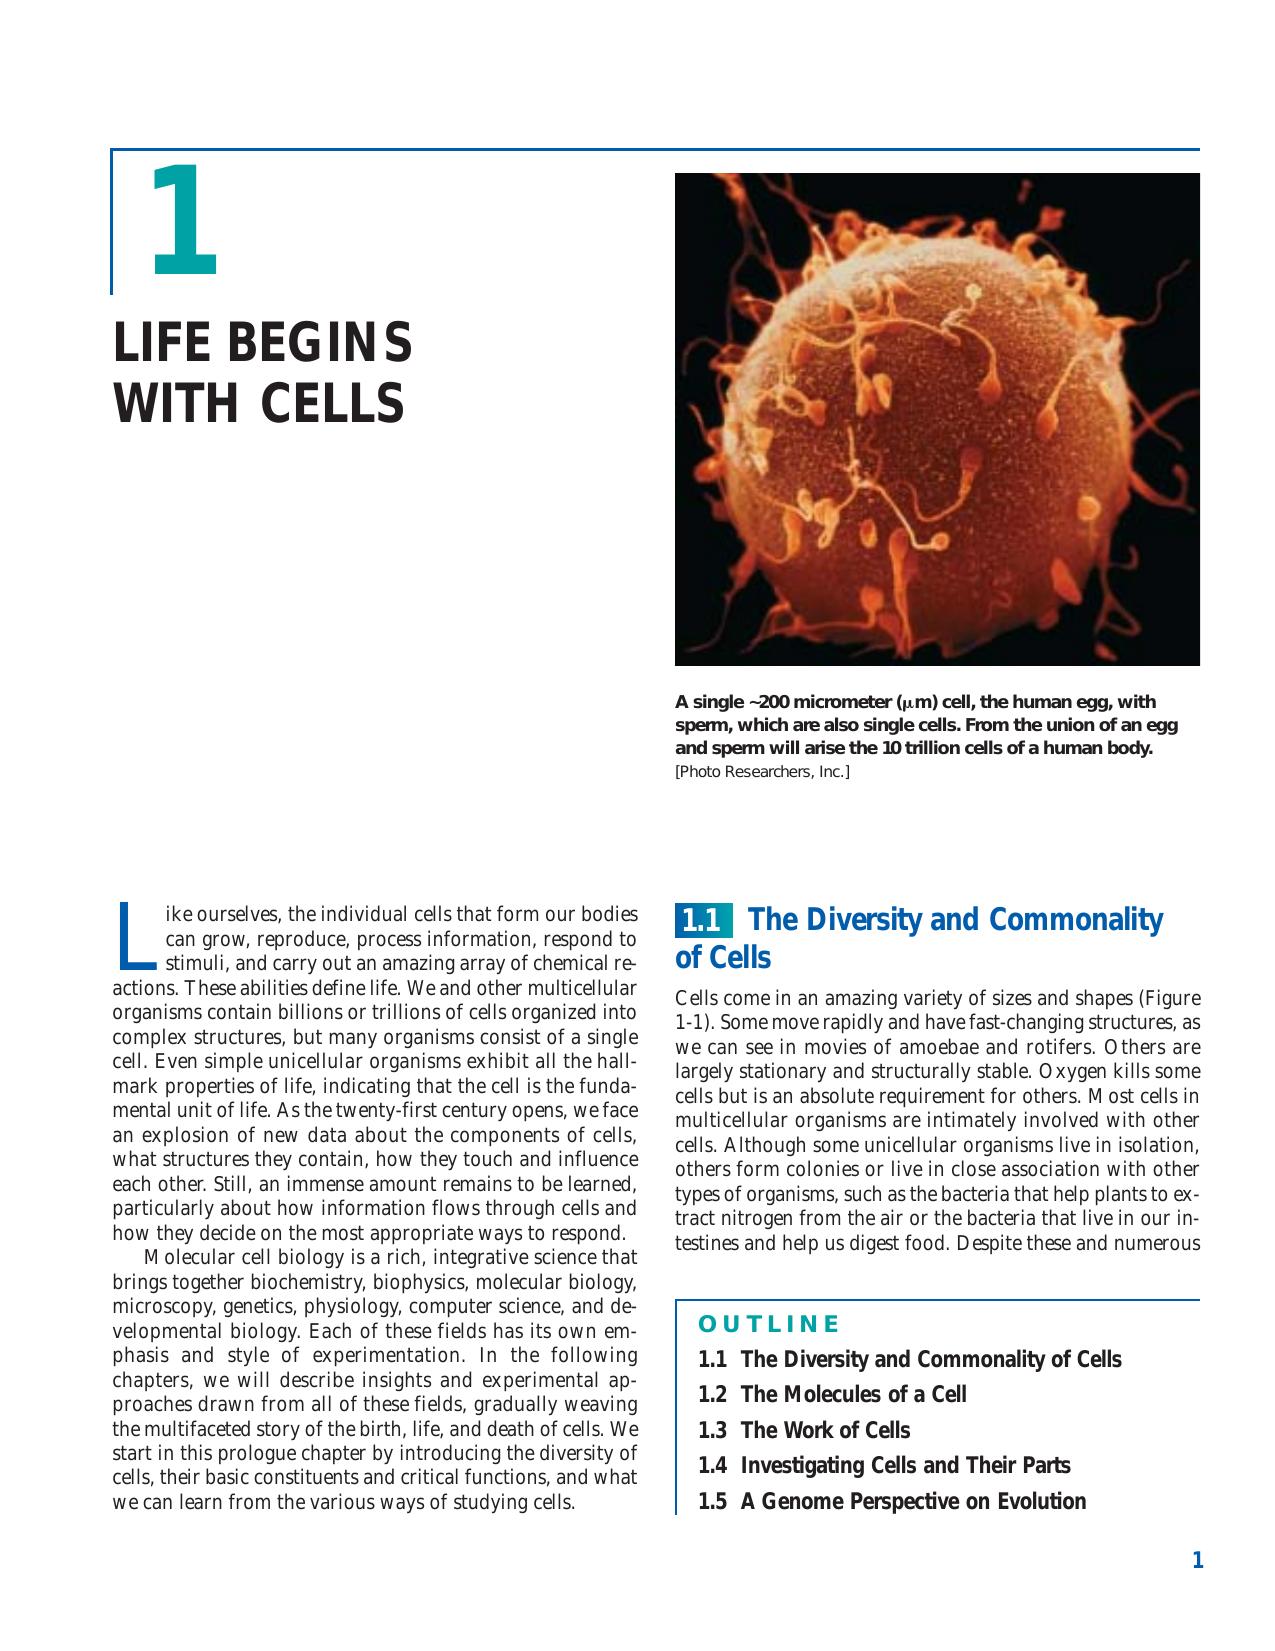 01 Life Begins with Cells